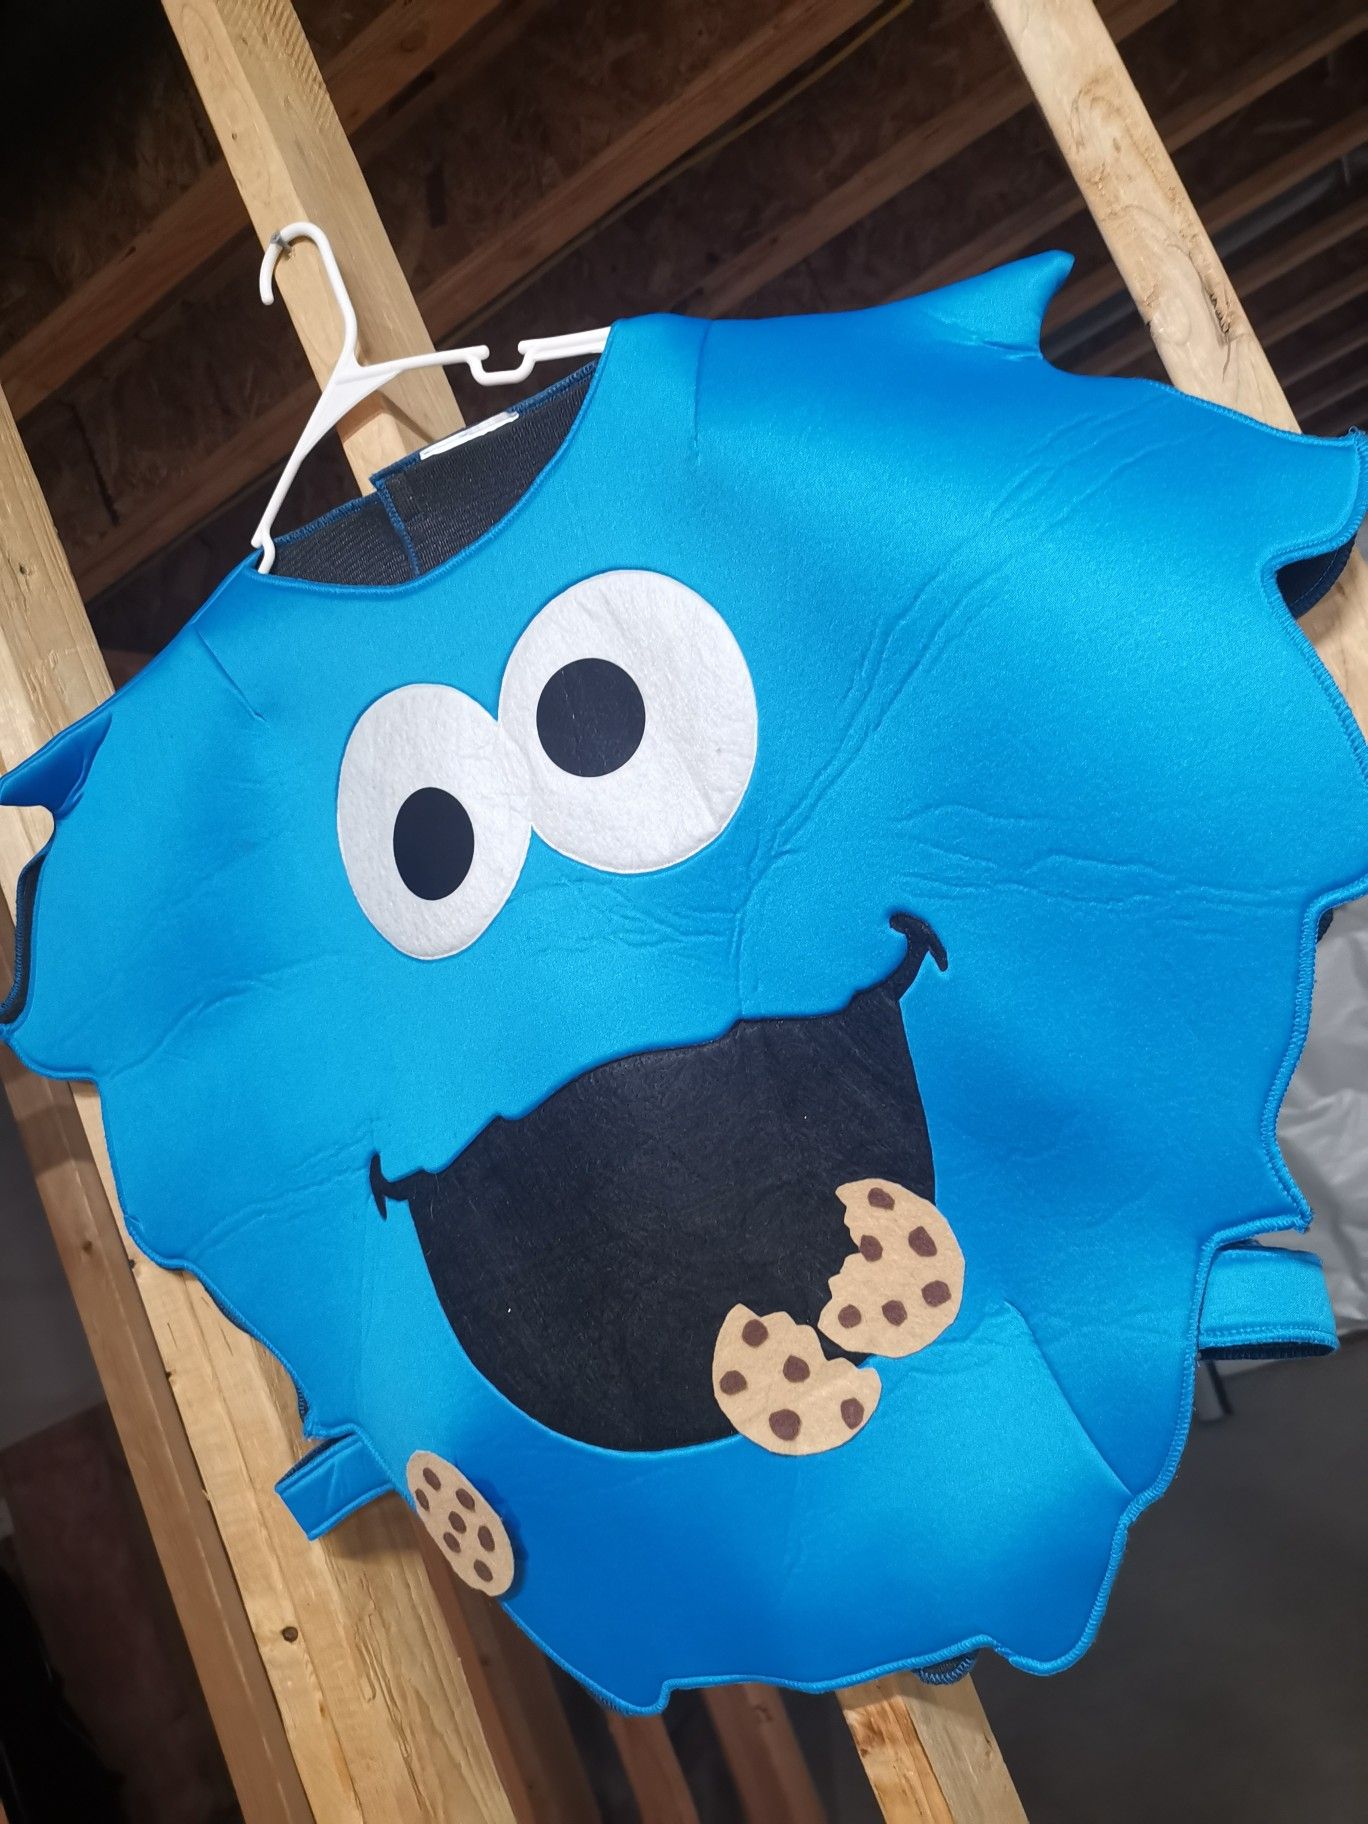 Cookie monster one size fits most costume dress up